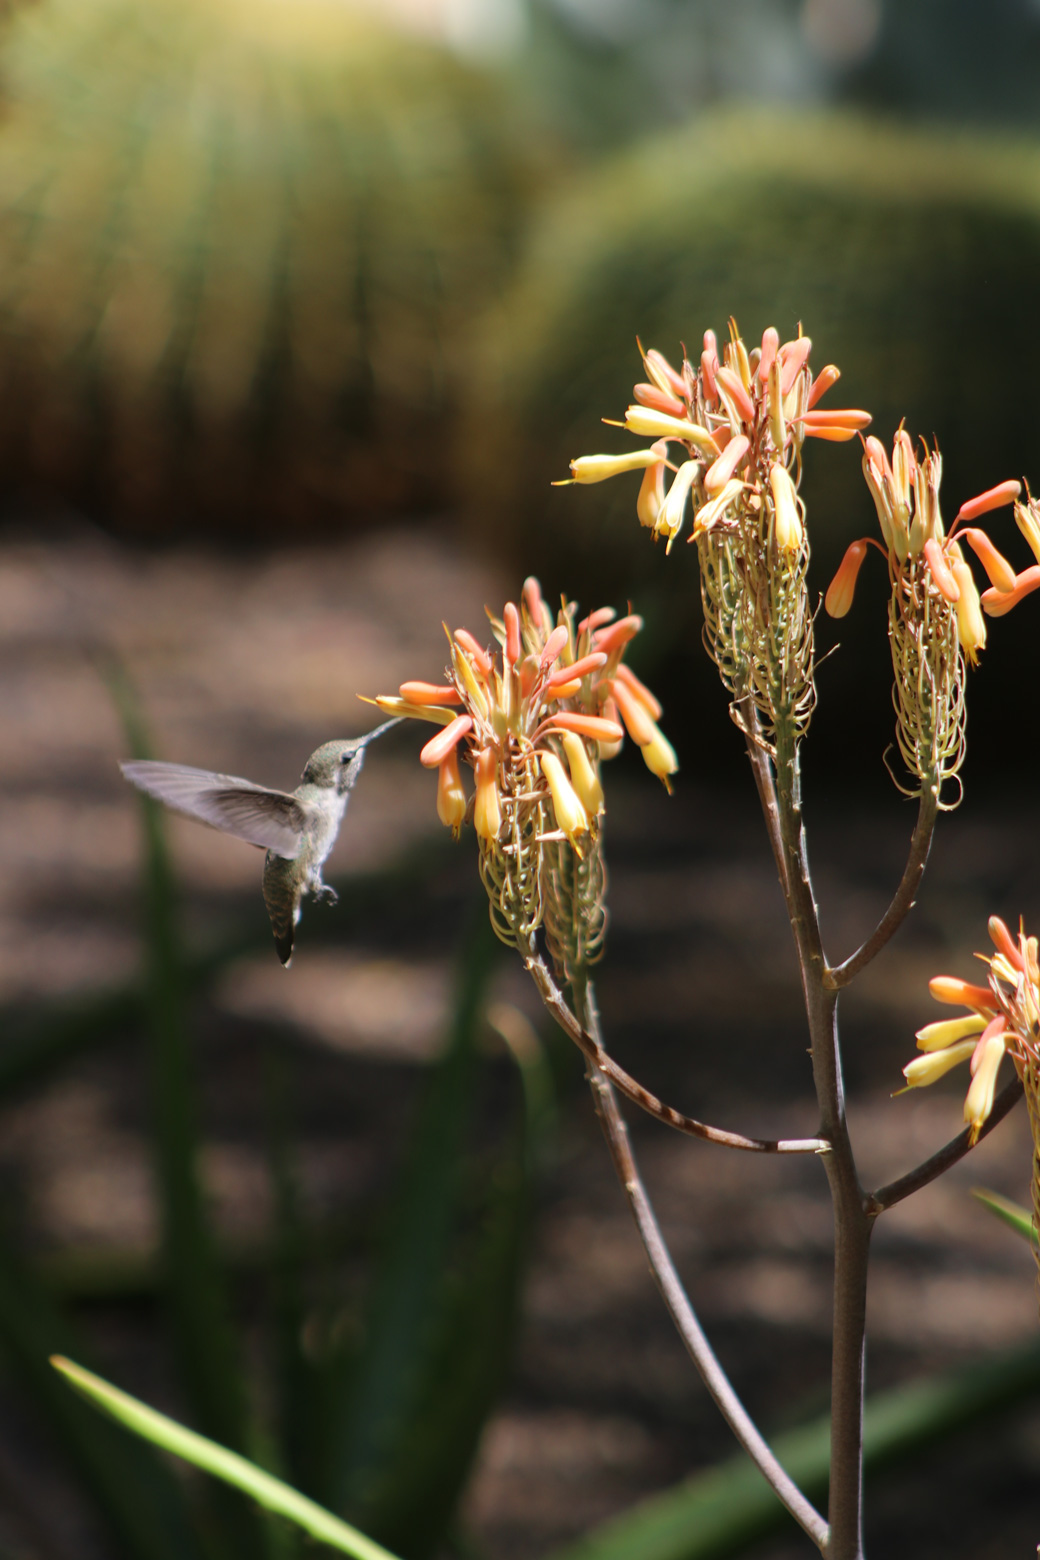 A hummingbird feeds at the coral flowers of the Nubian Aloe.